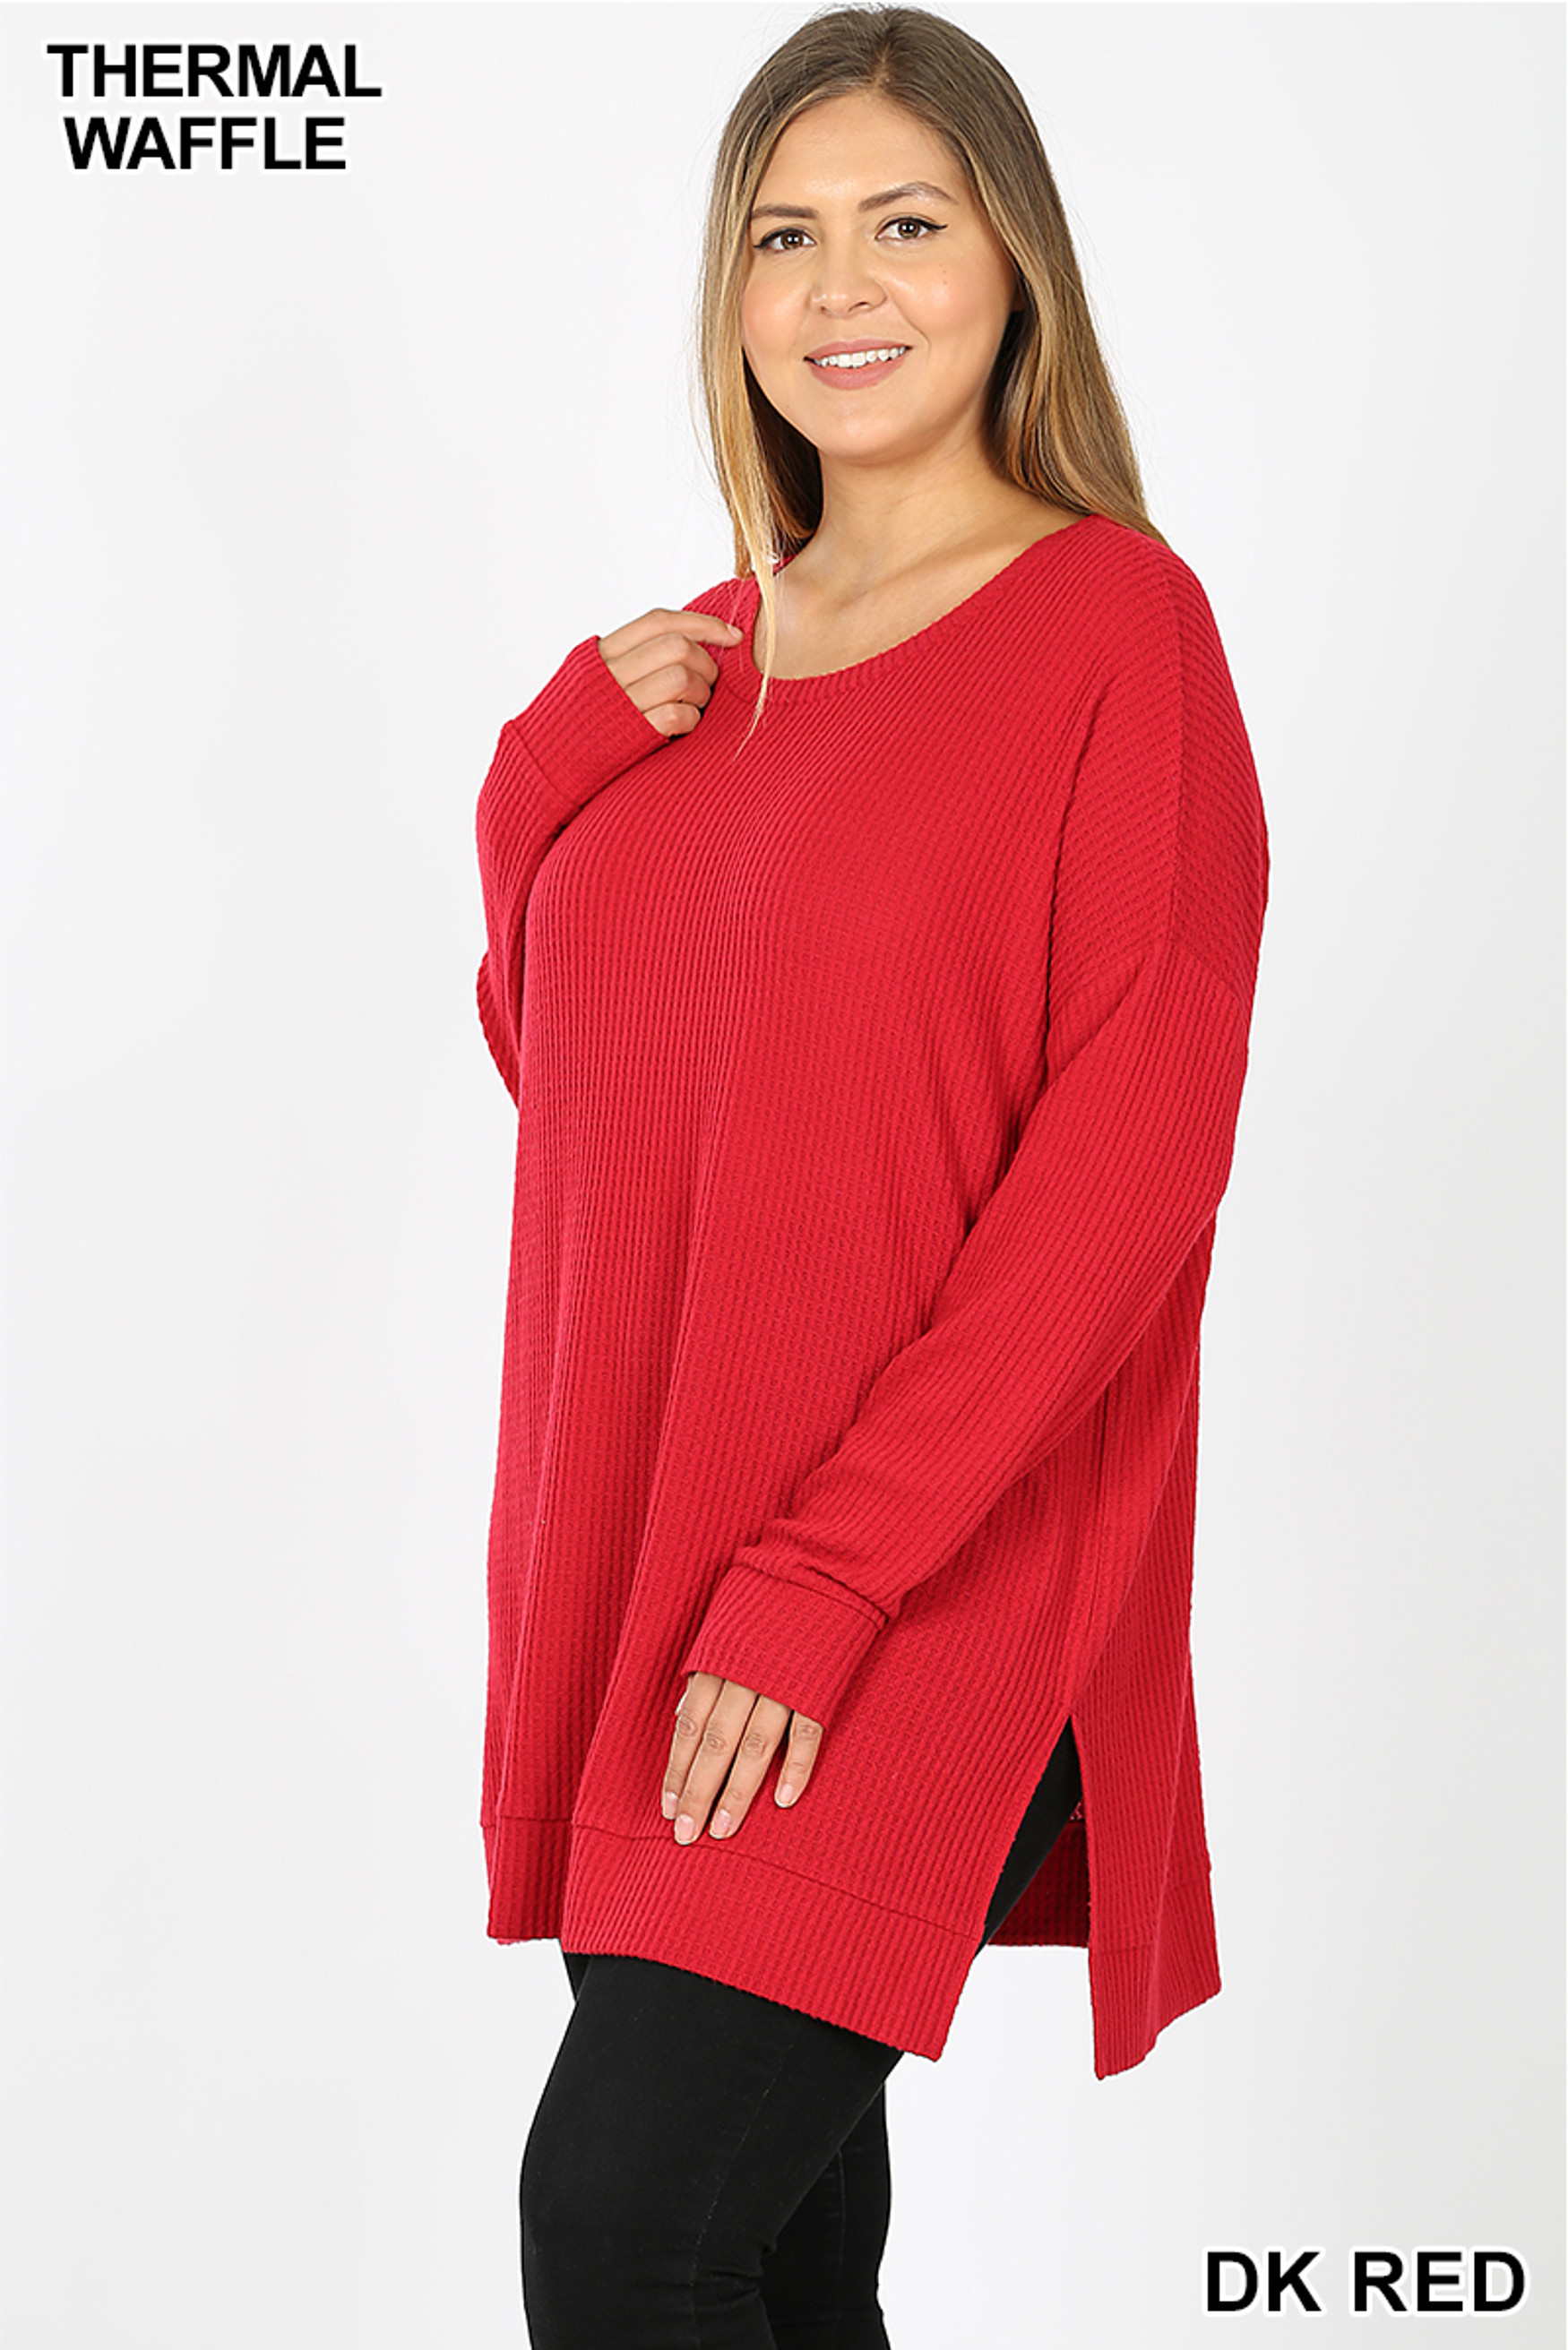 Left side image of  Dk Red Brushed Thermal Waffle Knit Round Neck Plus Size Sweater